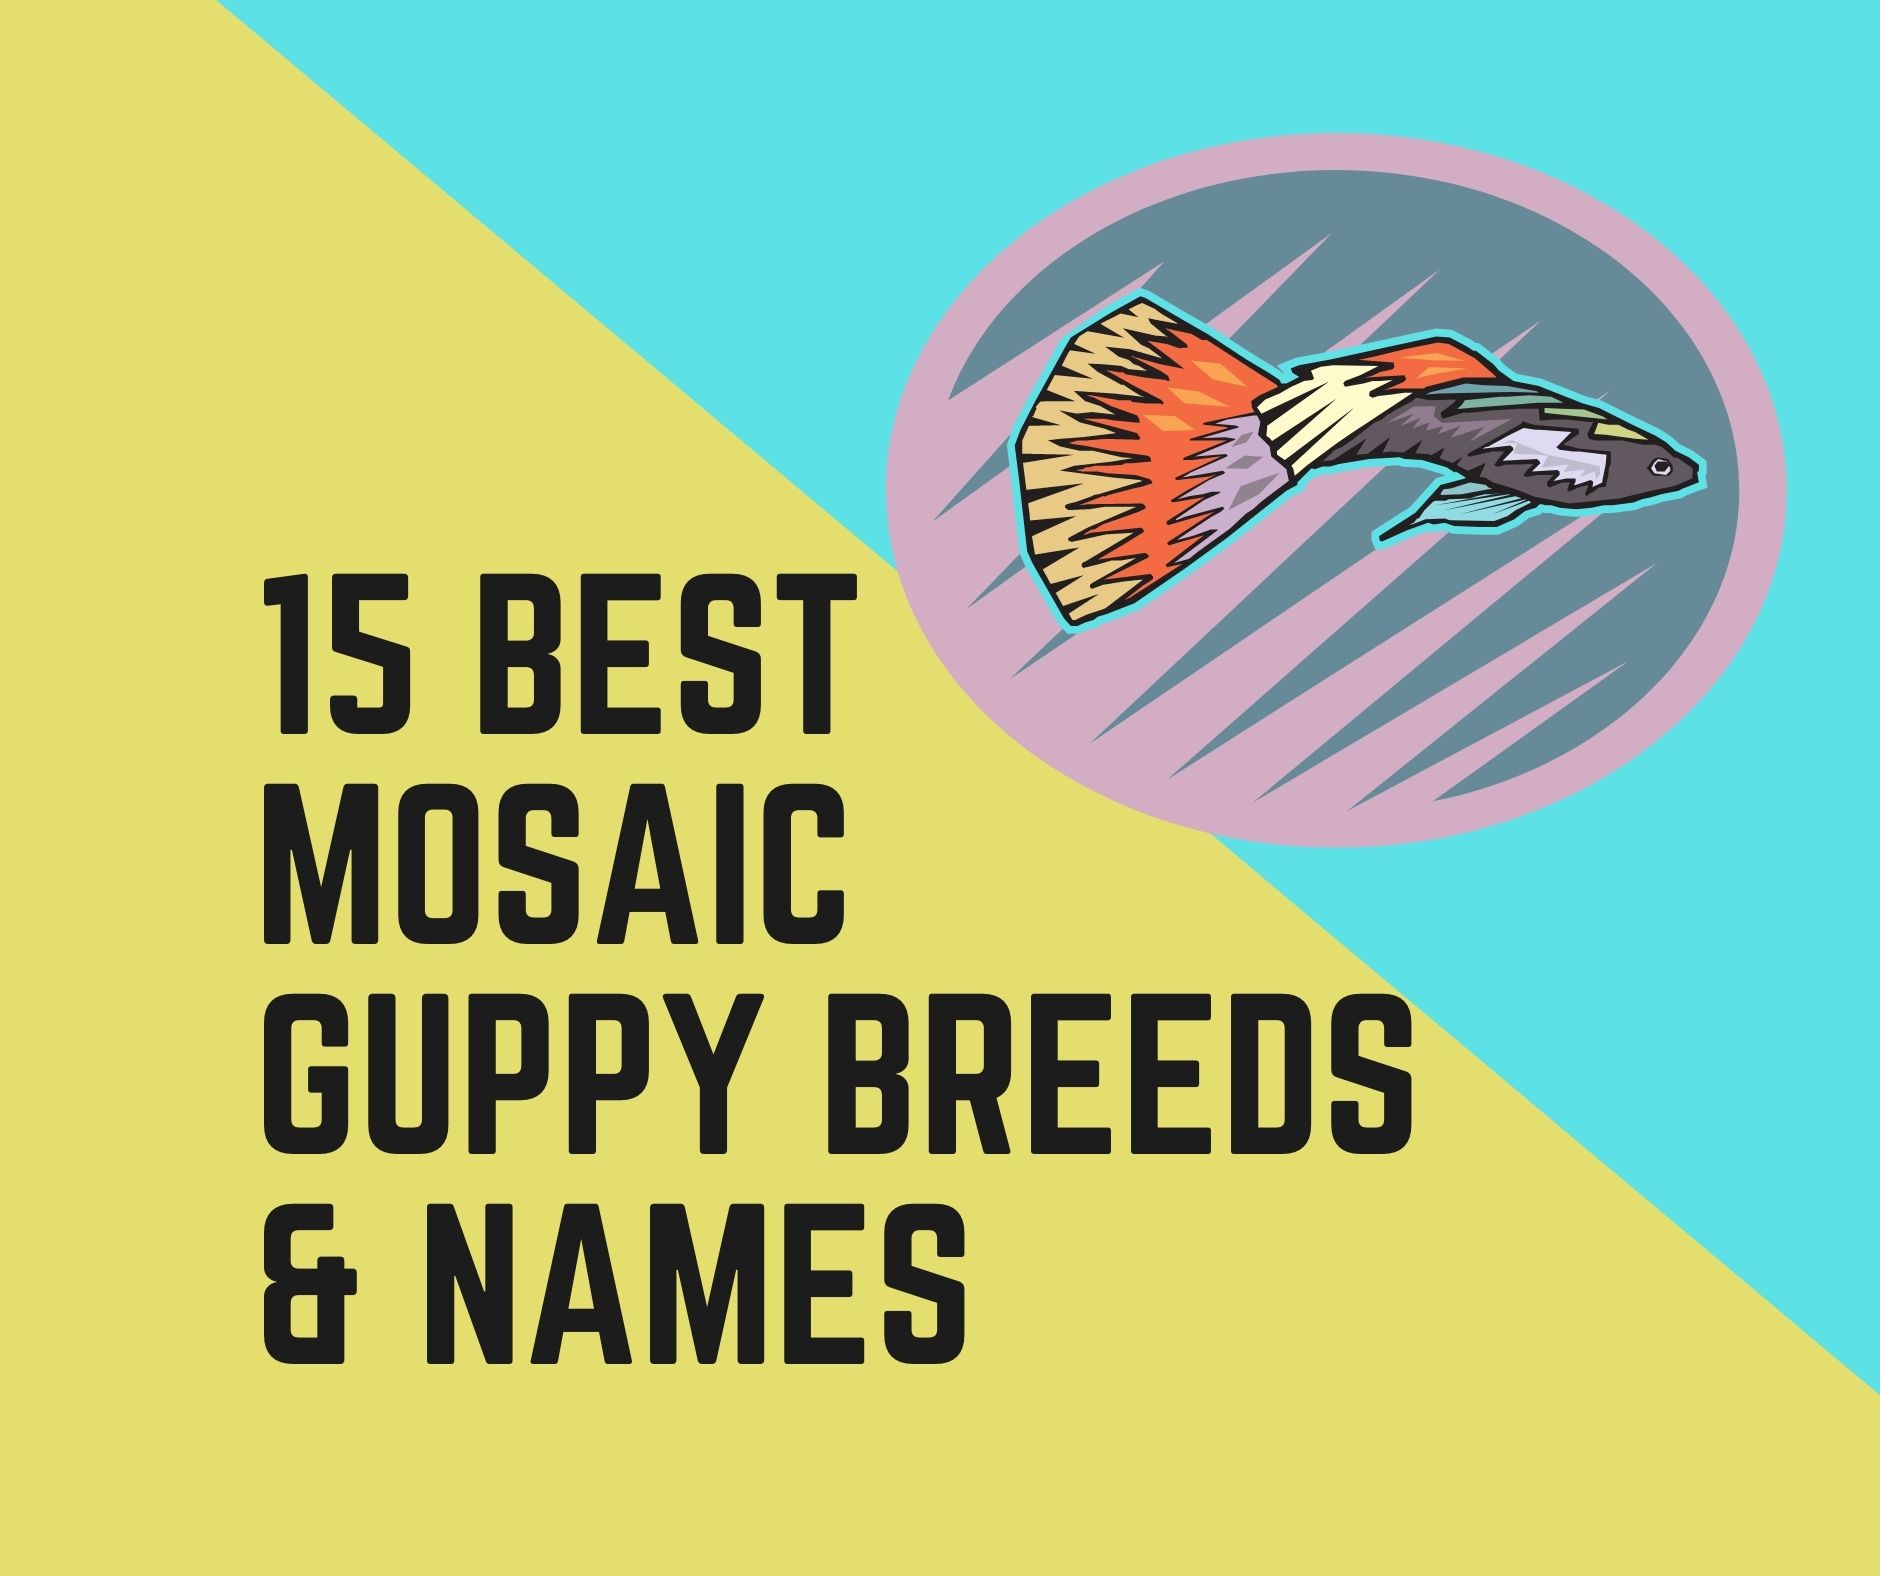 Mosaic Guppy Breeds and Names